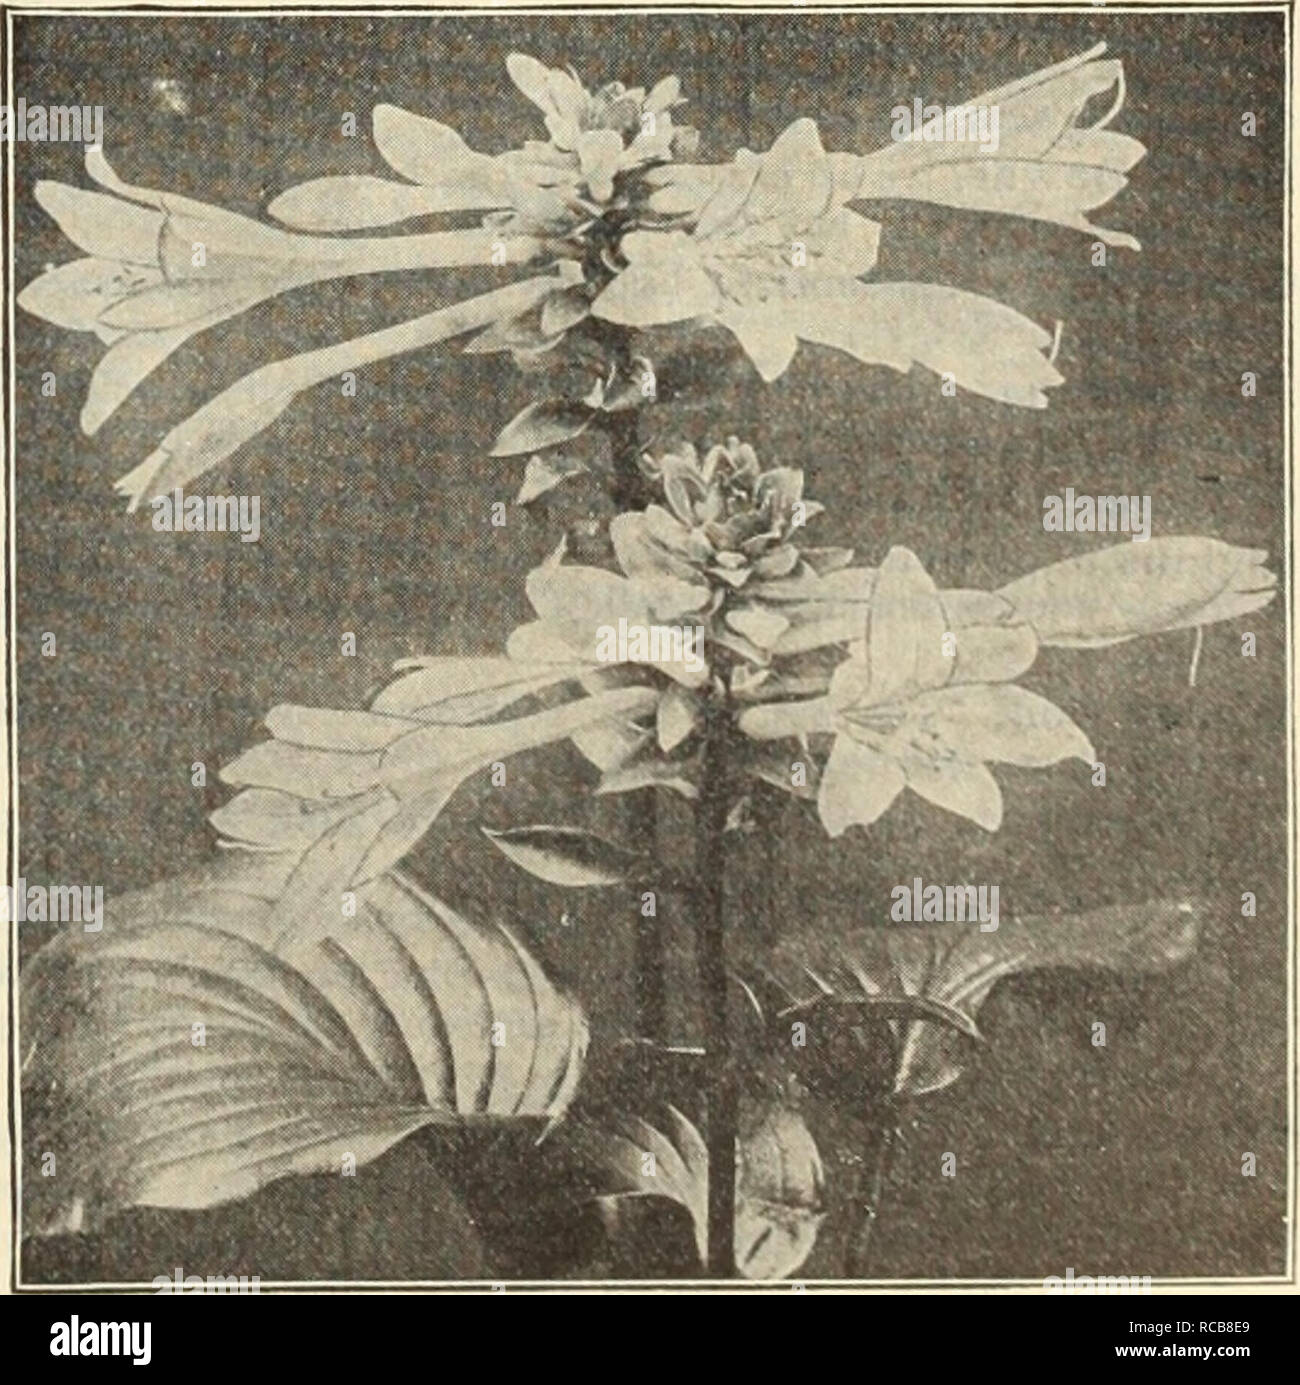 . Dreer's autumn catalogue 1914. Bulbs (Plants) Catalogs; Flowers Seeds Catalogs; Gardening Equipment and supplies Catalogs; Nurseries (Horticulture) Catalogs; Fruit Seeds Catalogs; Vegetables Seeds Catalogs. Digitalis (Foxglove). durina DIGITALIS Foxglove). The Foxglove, old-fashioned, dignified and statel their period of flowering dominate the whole garden. Ciloxinaeflora {Gloxinia-flowered). A beautiful strain of finely-spotted varieties. We offer them in White, Furph-, Lihic, Rose or Mixed. Ambigua, or Grandiflora. Showy flowers of pale yellow, veined brown, Lanata. Dense spikes of odd-loo Stock Photo